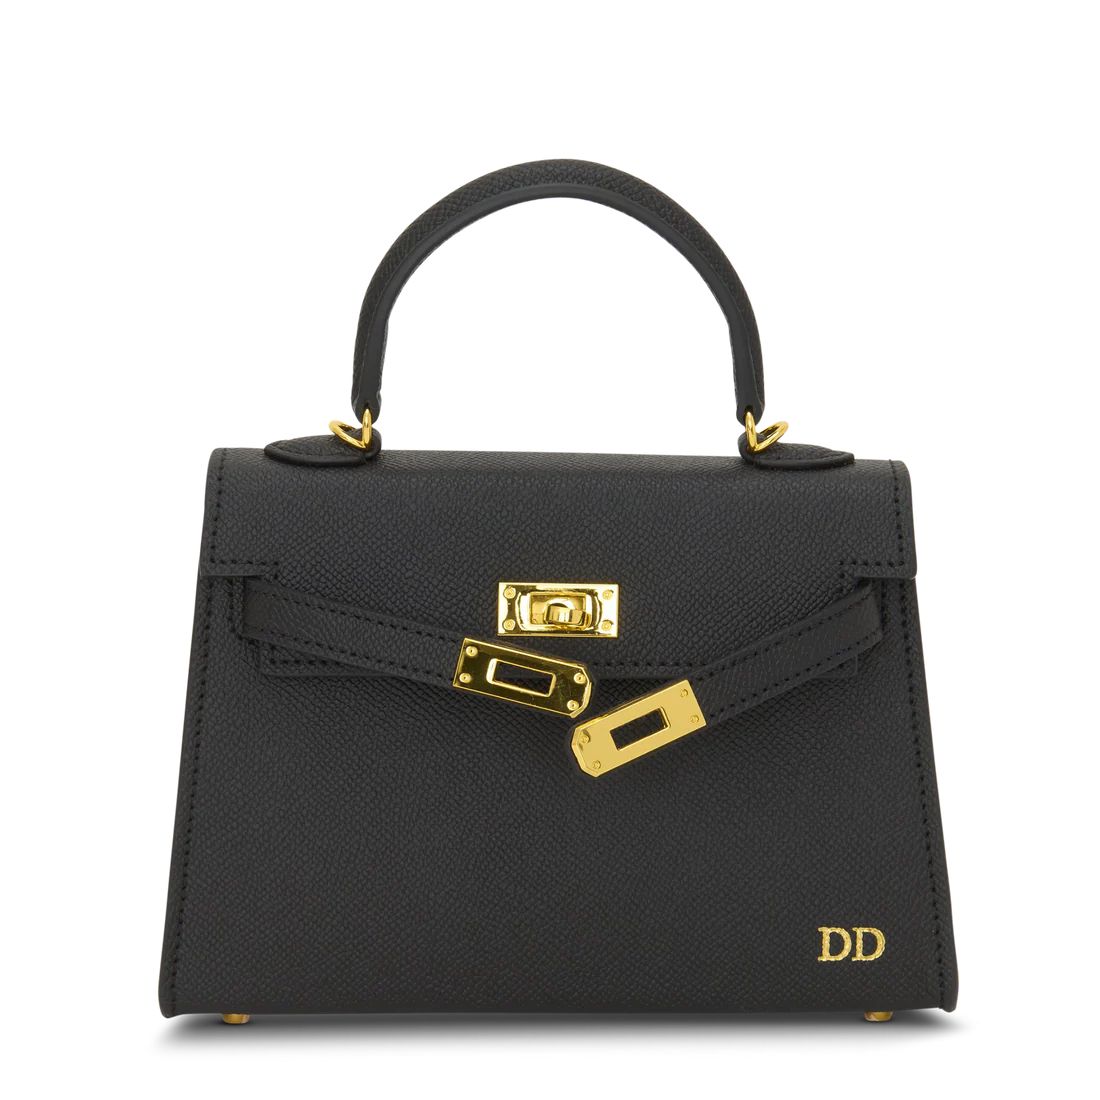 Lily & Bean Hettie Mini Bag - Black with Initials & Patterned Strap | Lily and Bean